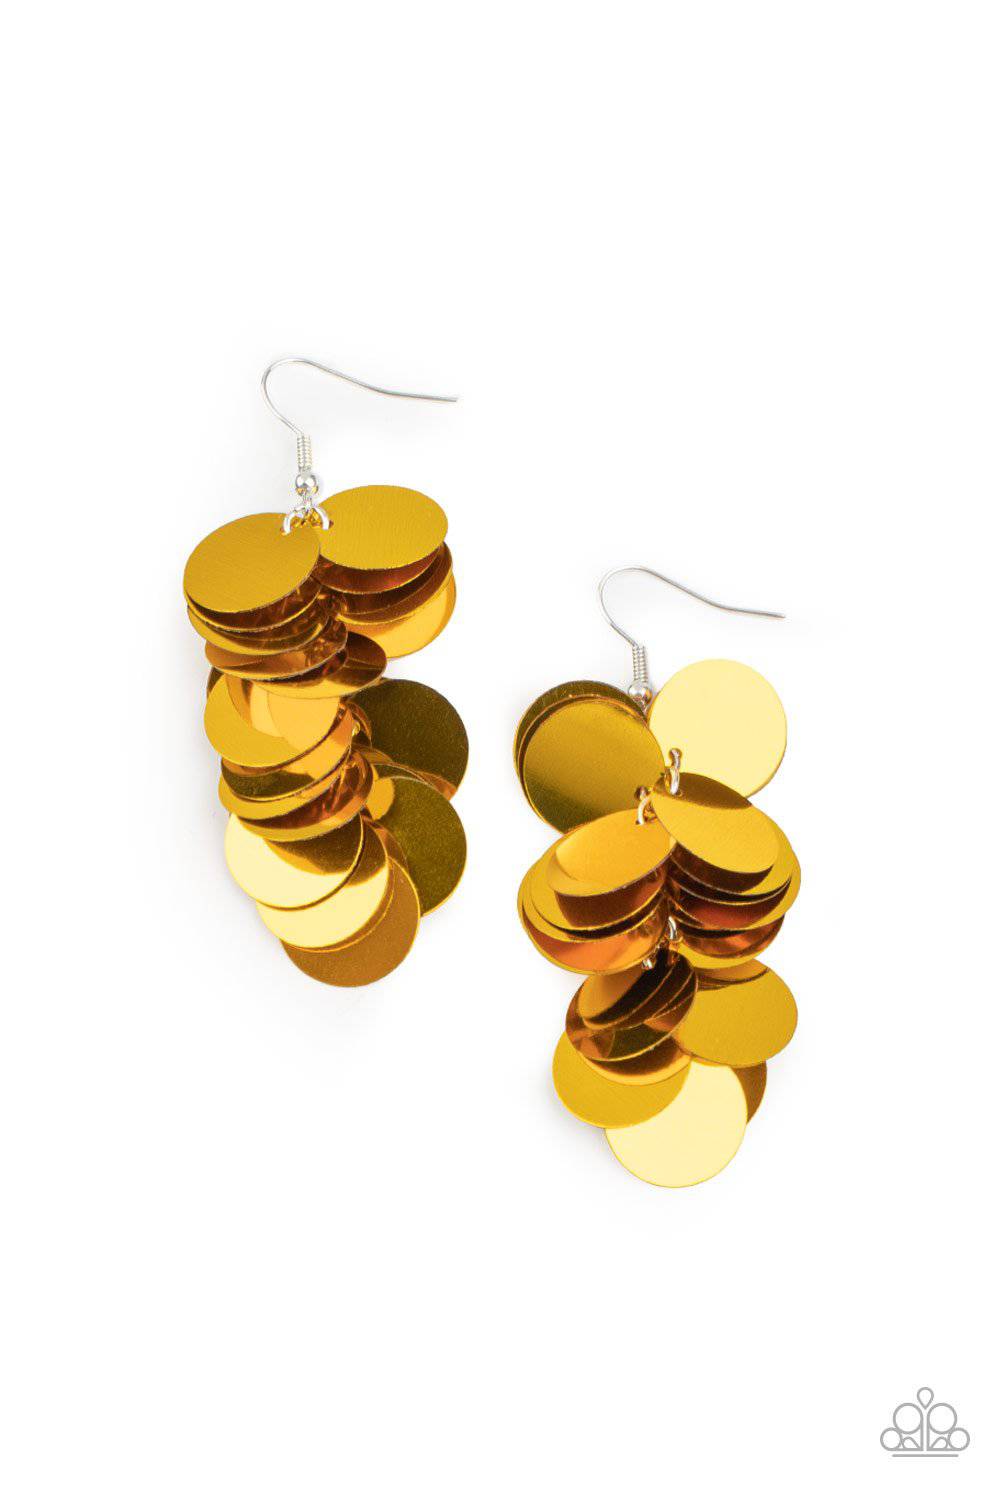 Now You SEQUIN It - Gold Sequins Earrings - Paparazzi Accessories - GlaMarous Titi Jewels